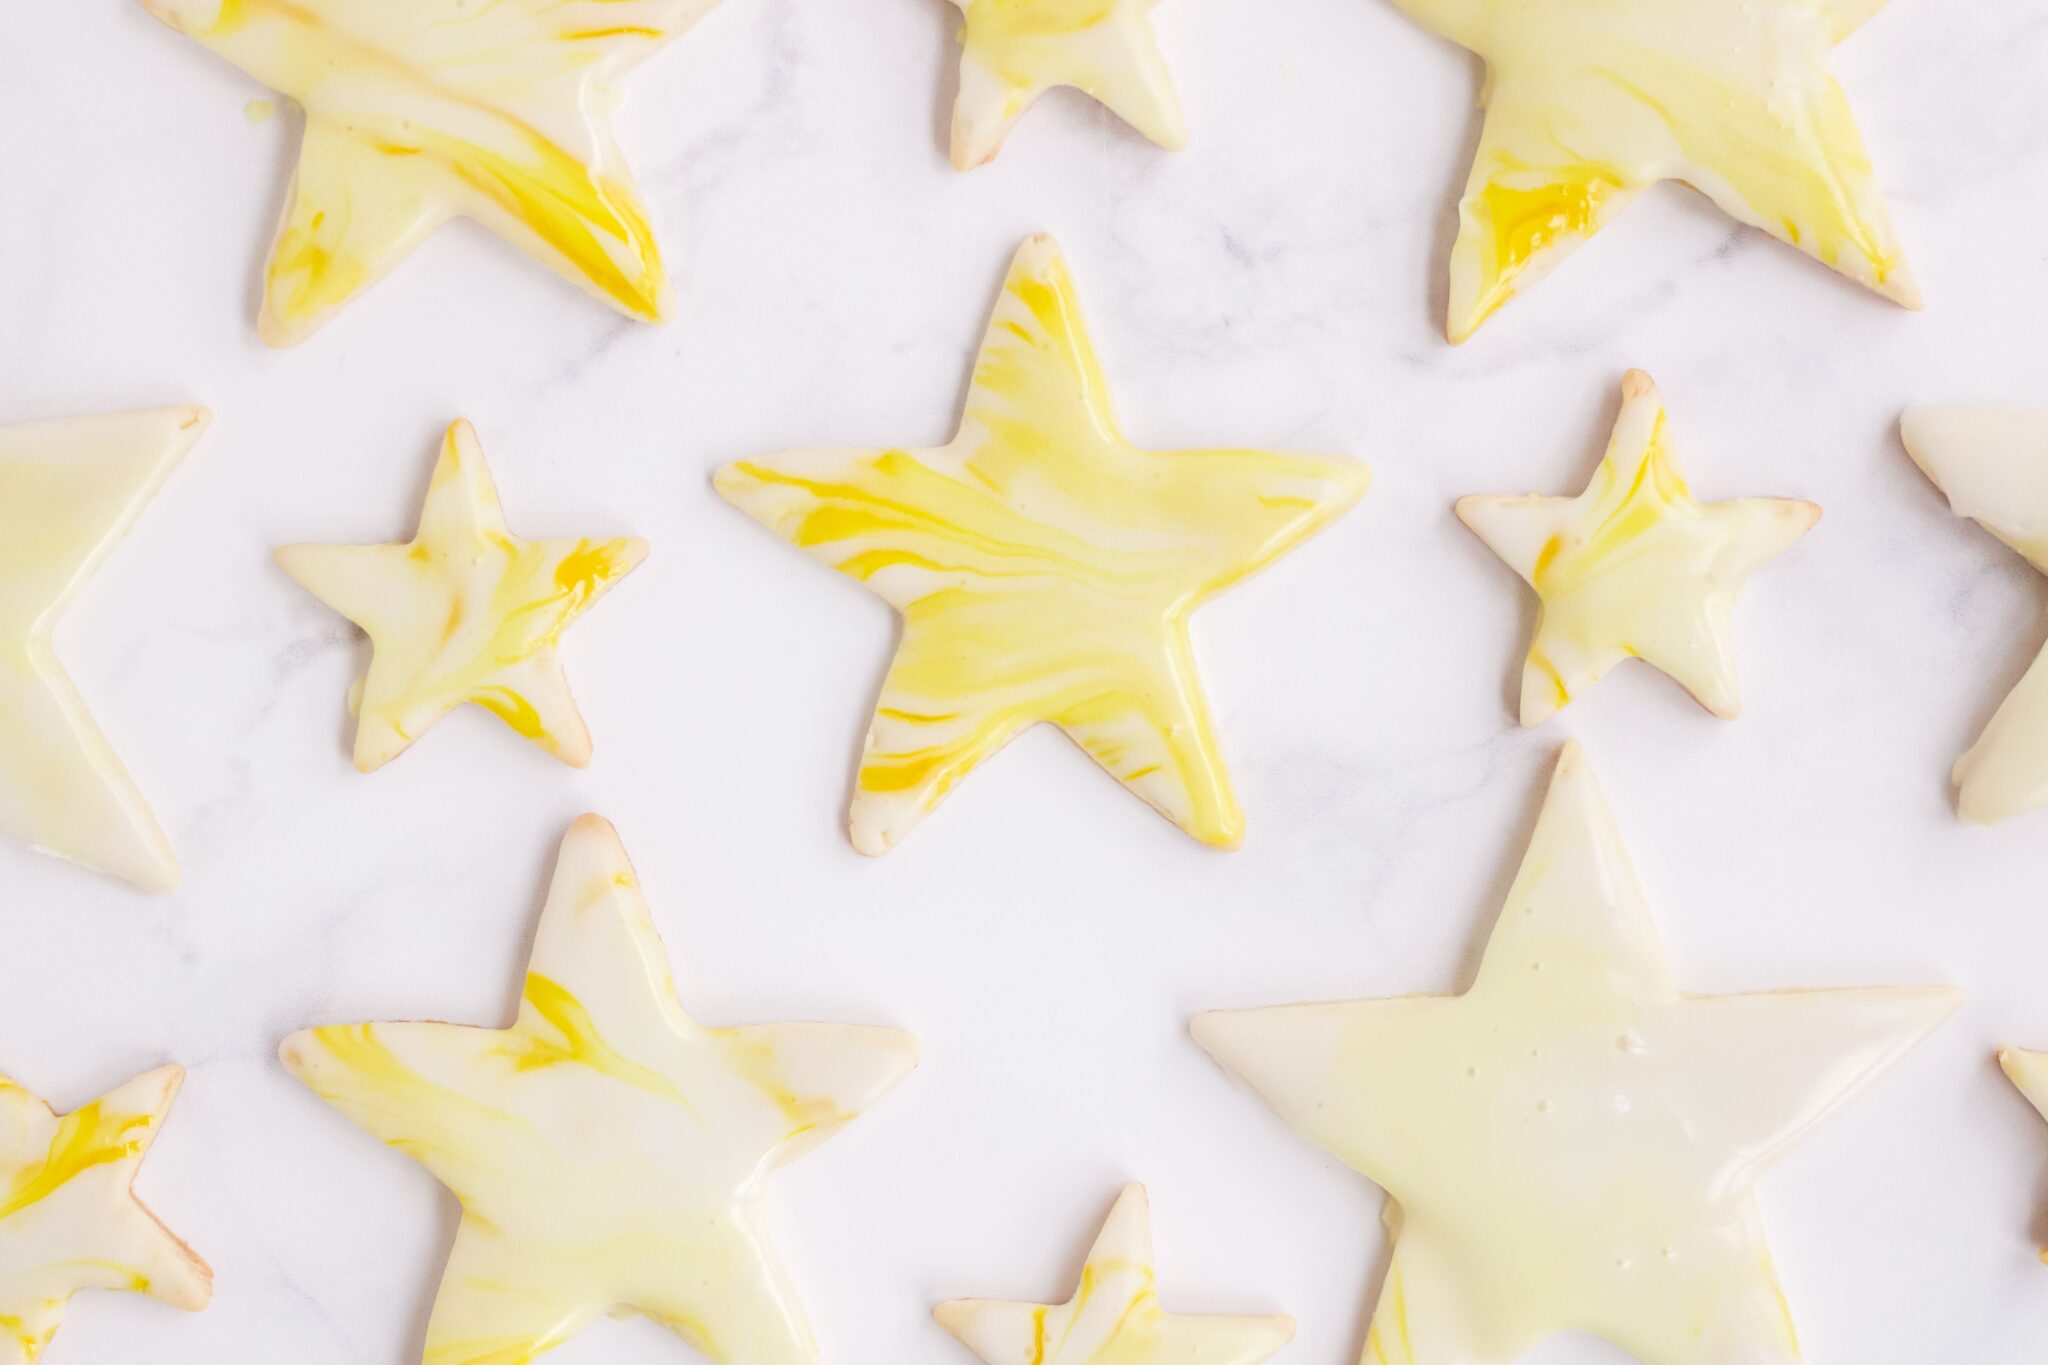 Star shaped cutout sugar cookies topped with yellow marbled royal icing, spread out on a marble surface.